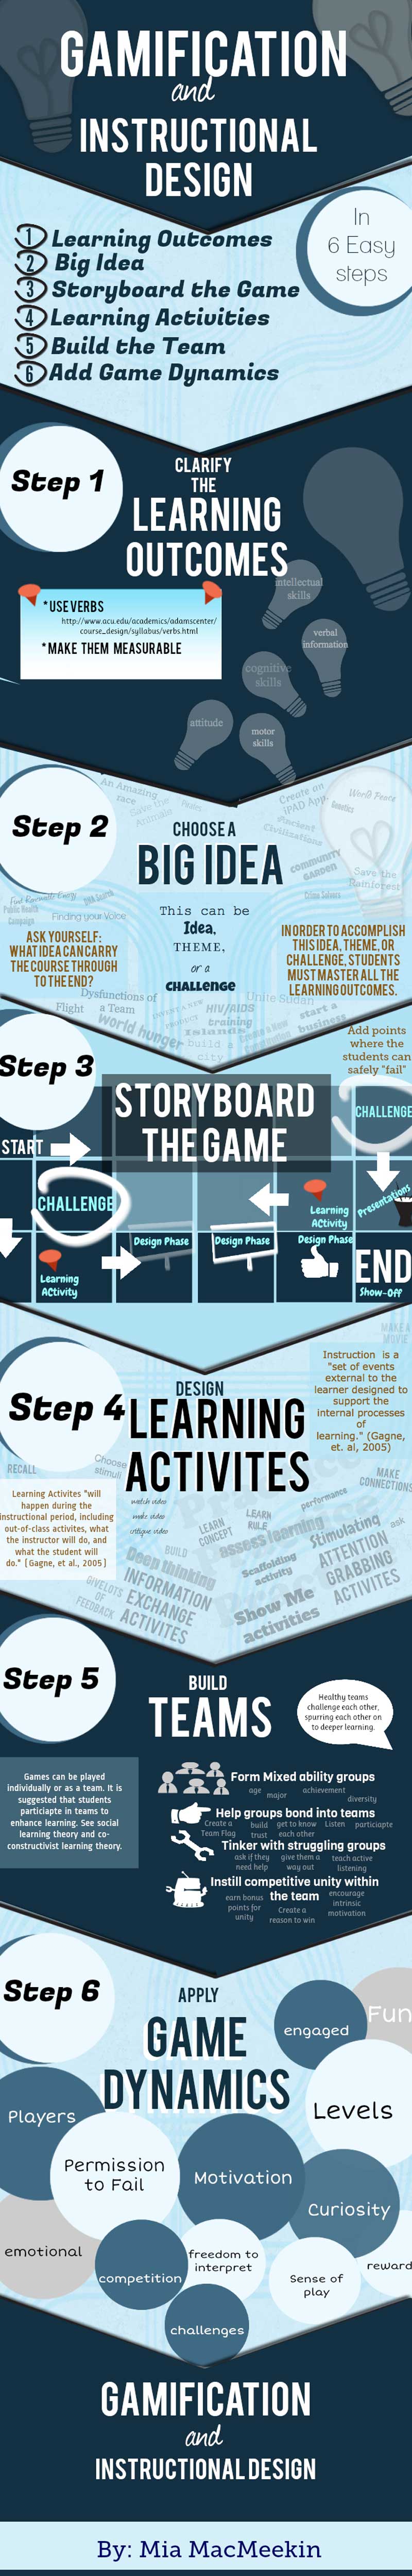 Infographic Gamification and Instructional Design